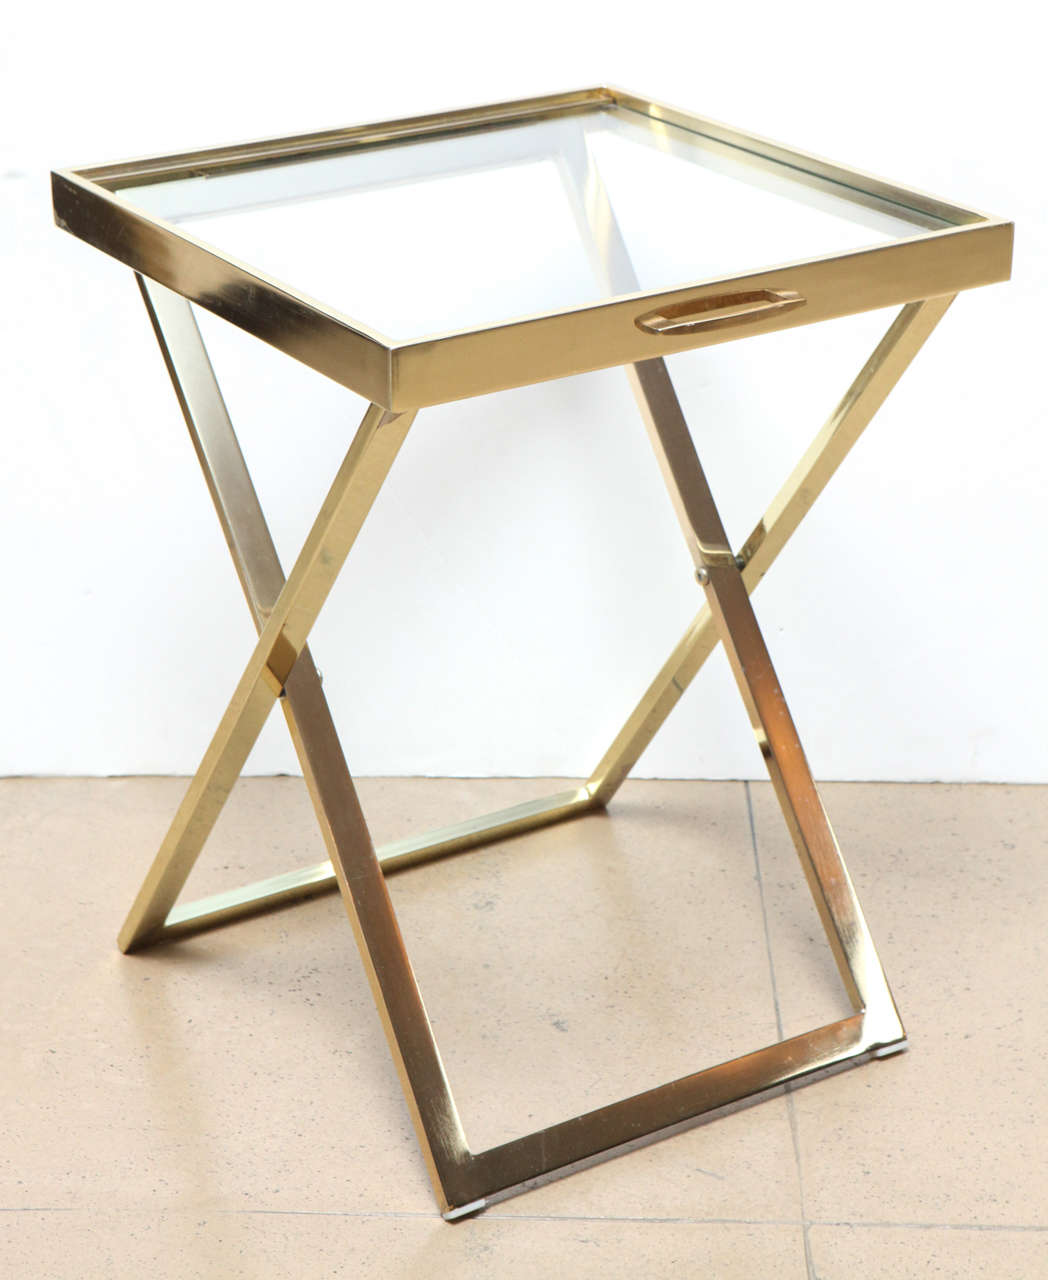 1970s Italian glass and brass tray atop a folding brass stand.